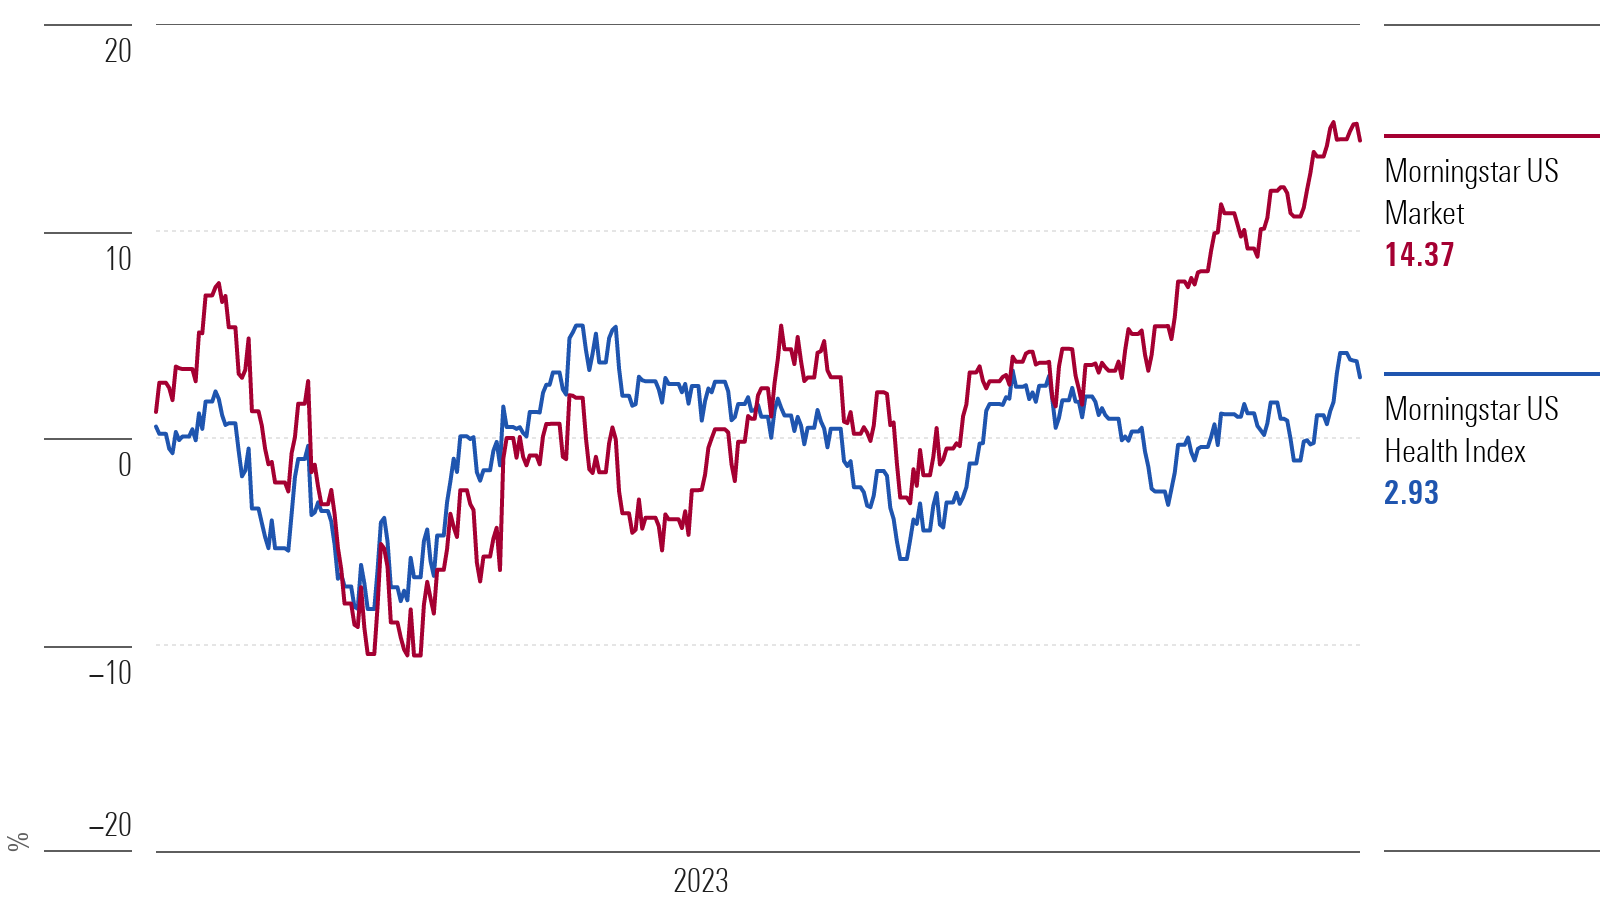 Chart showing trailing 12 month performance of Morningstar Healthcare Index & US Market.